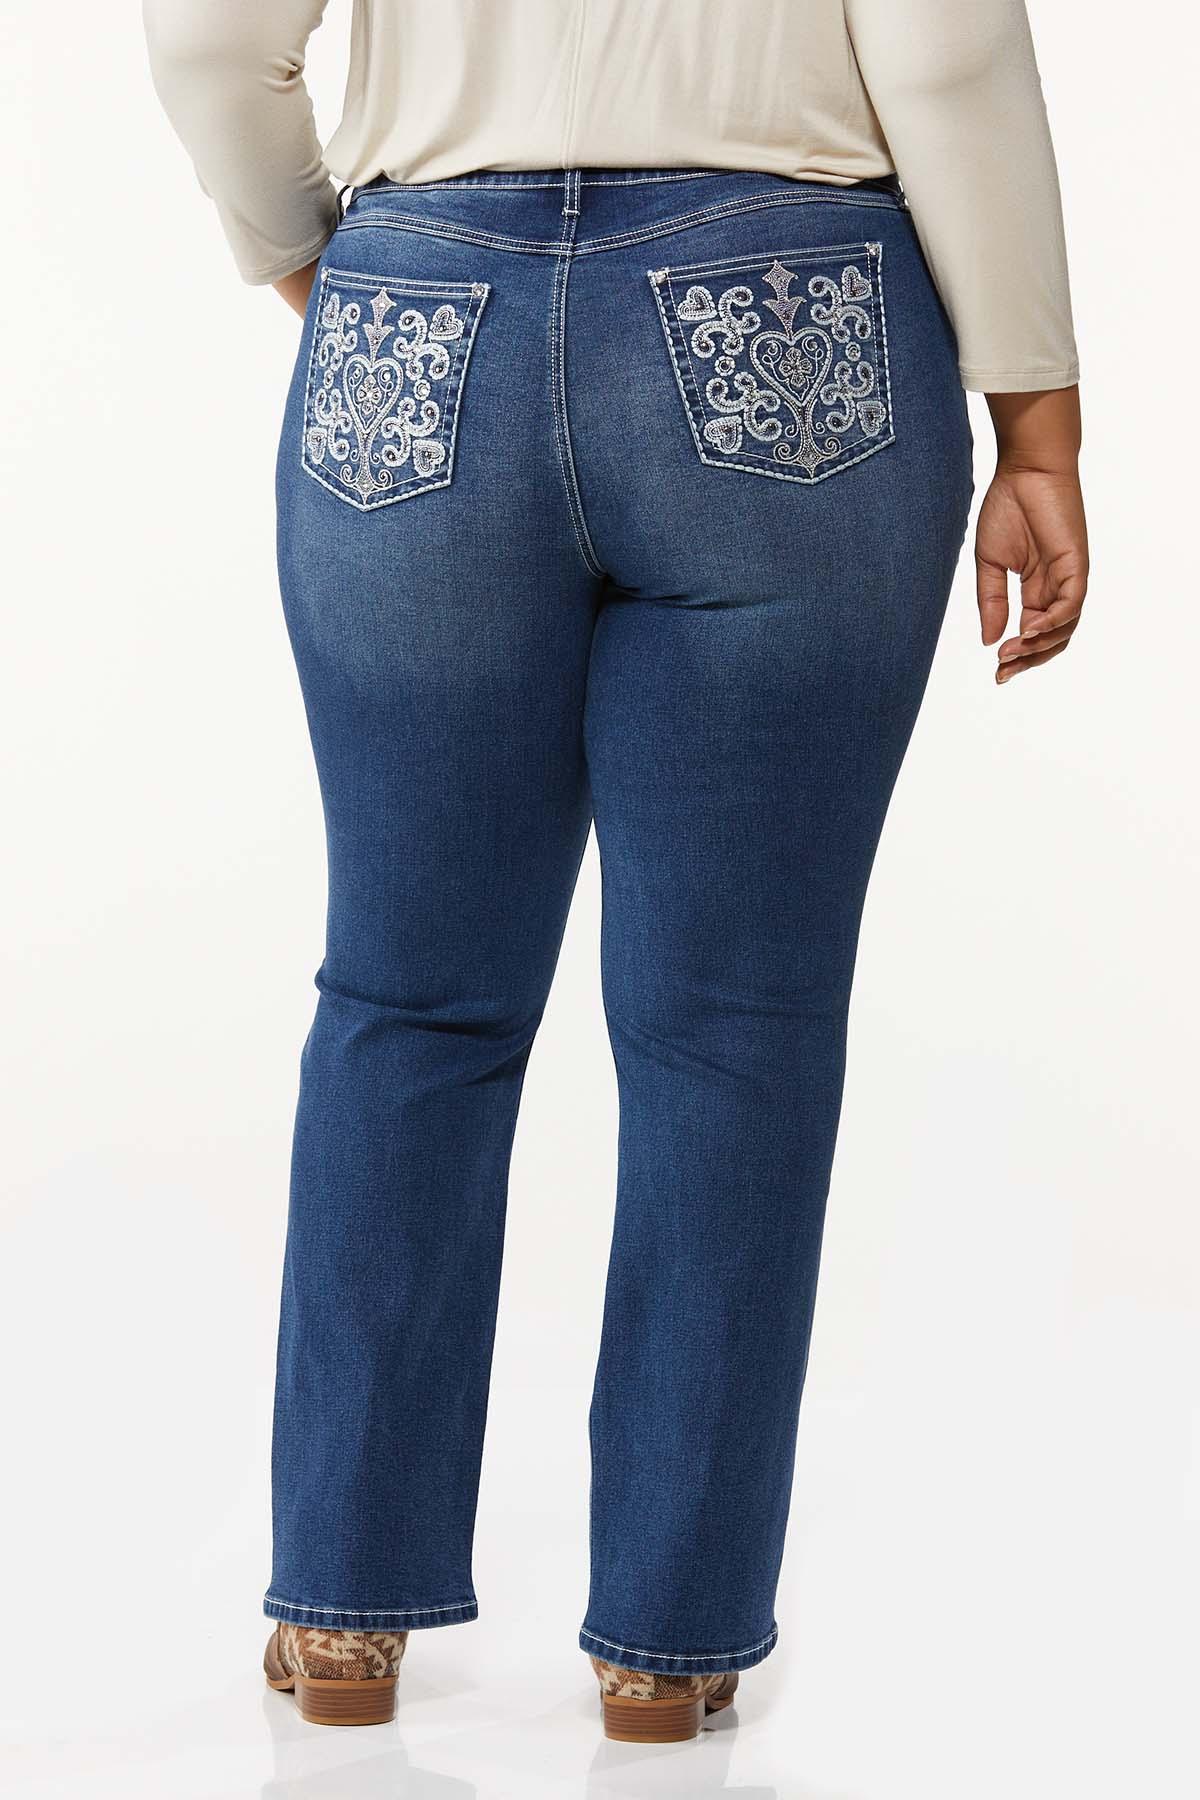 Plus Petite Heart Embroidered Jeans